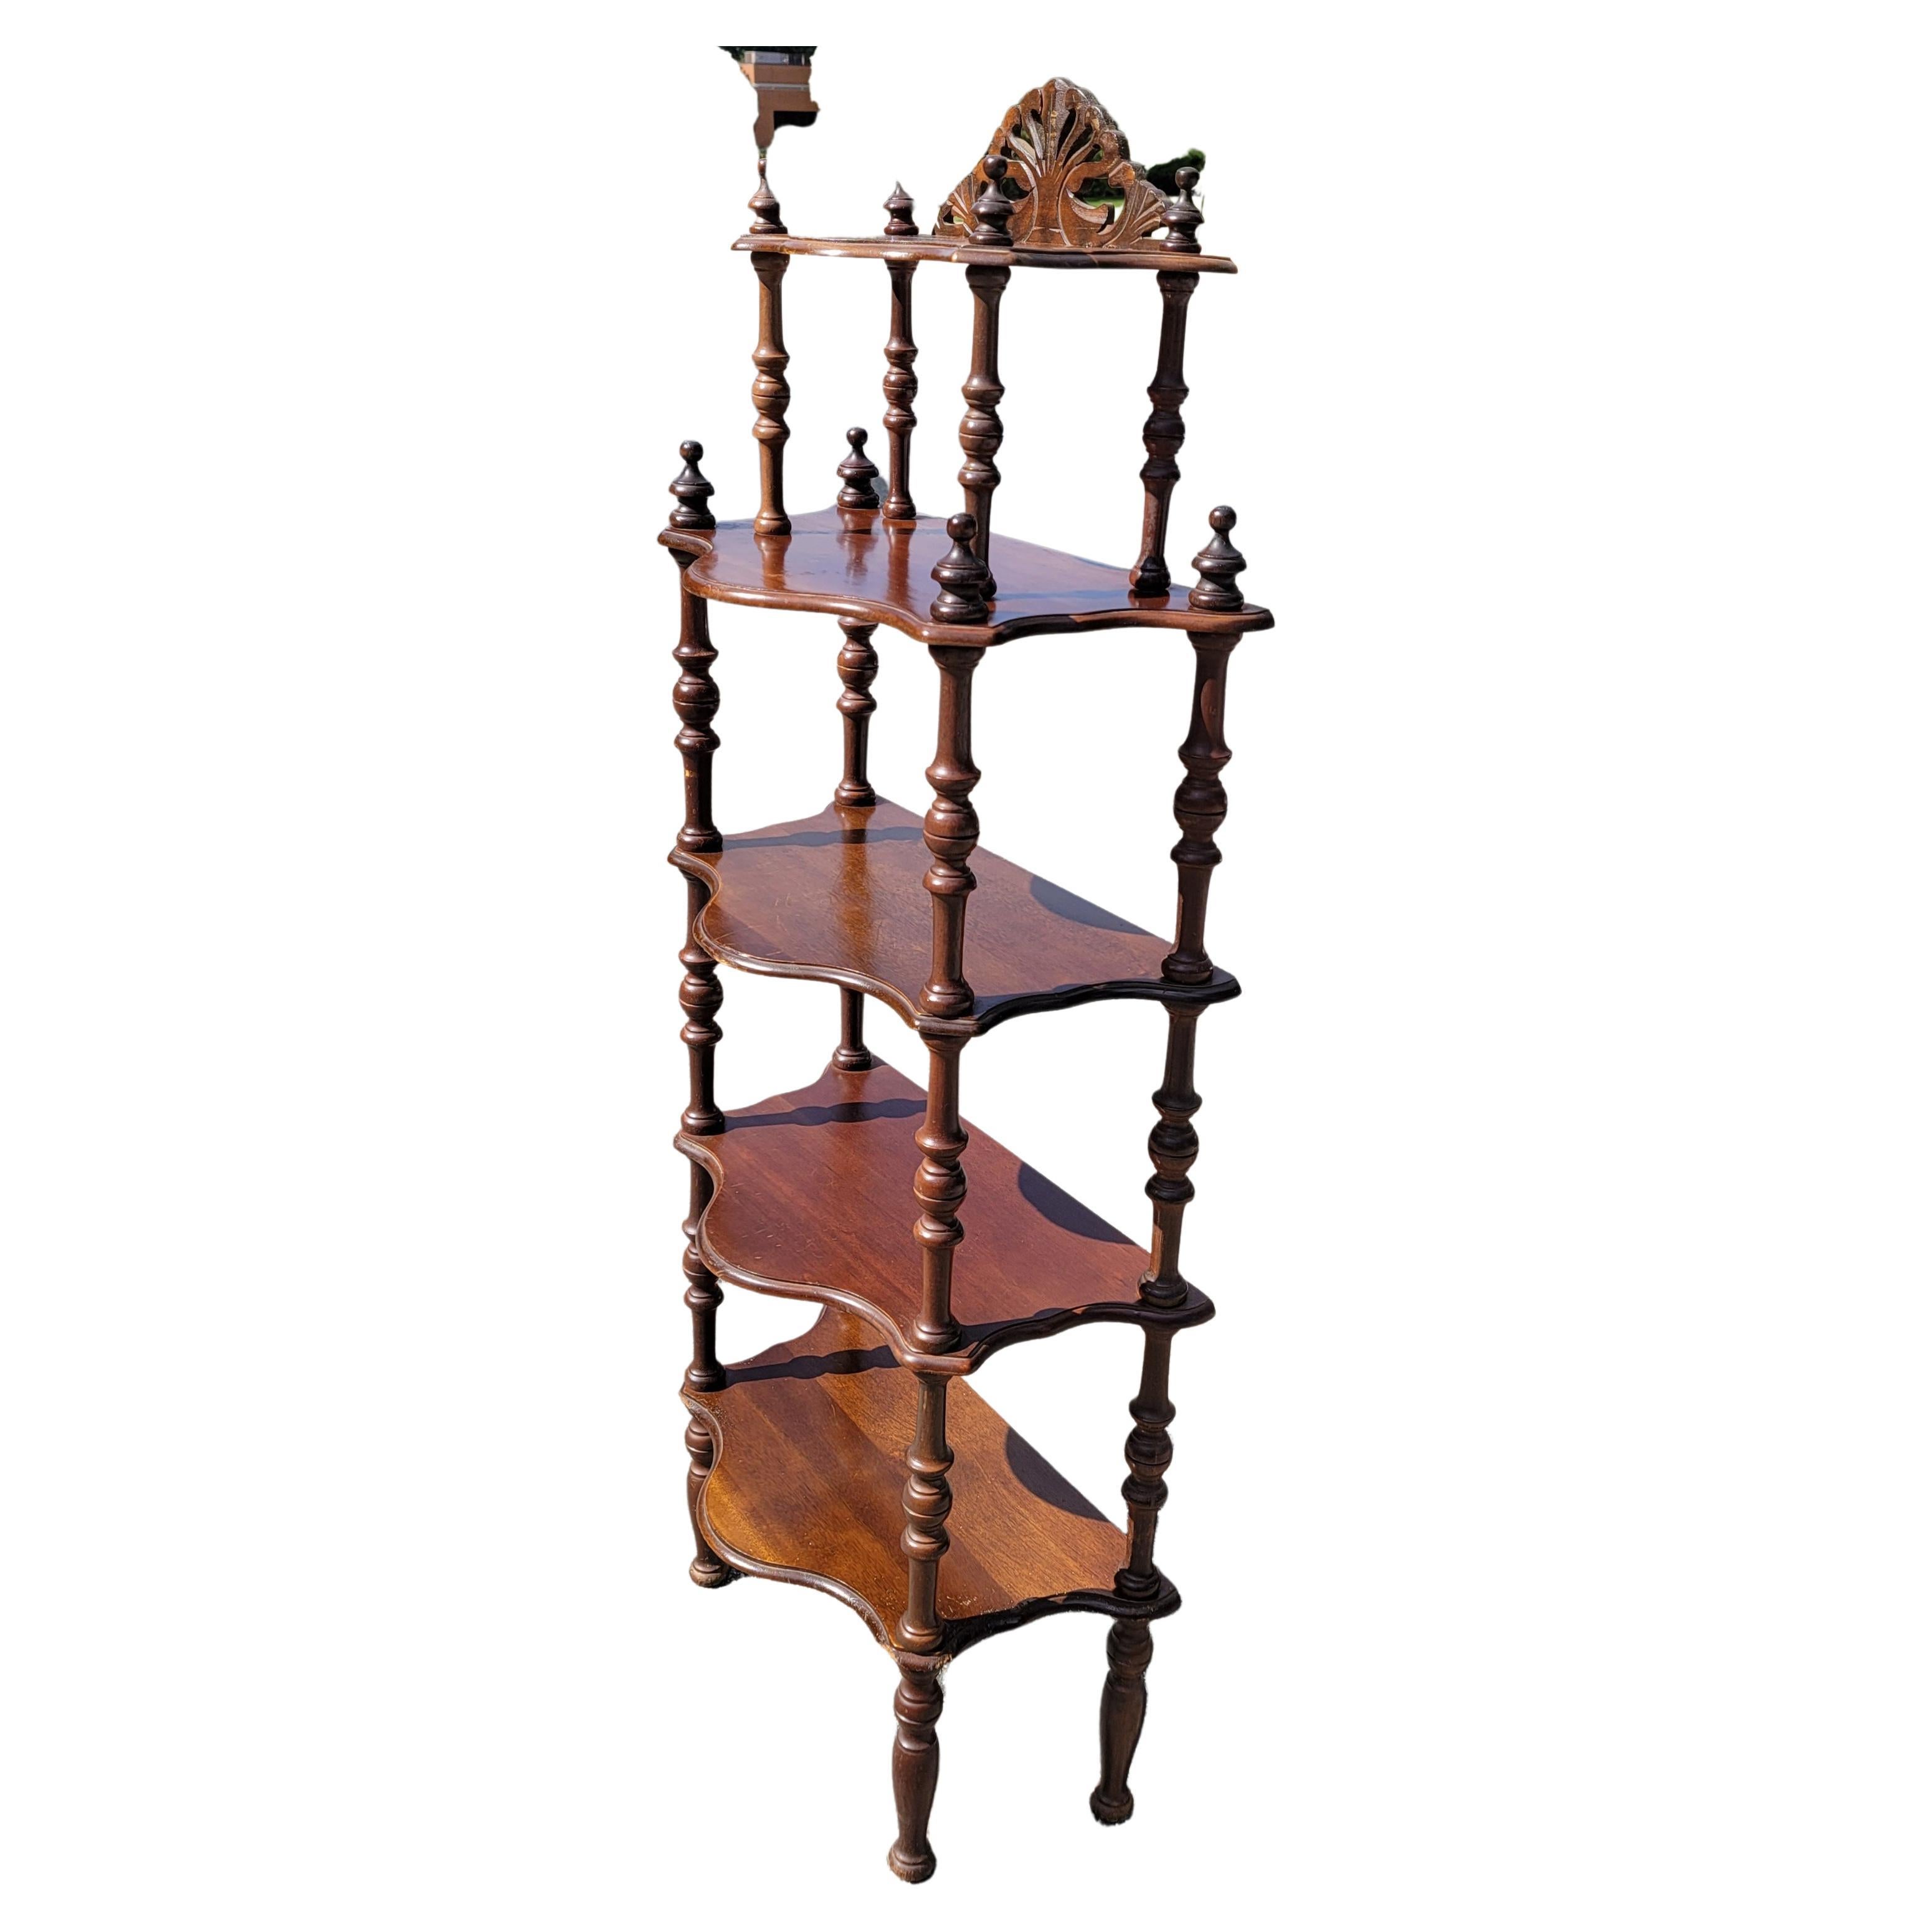 A patinated Antique English Regency Style mahogany Narrow Etagere in good condition. 
Great for displaying arts and other ornamental objects.
Measures 53.75